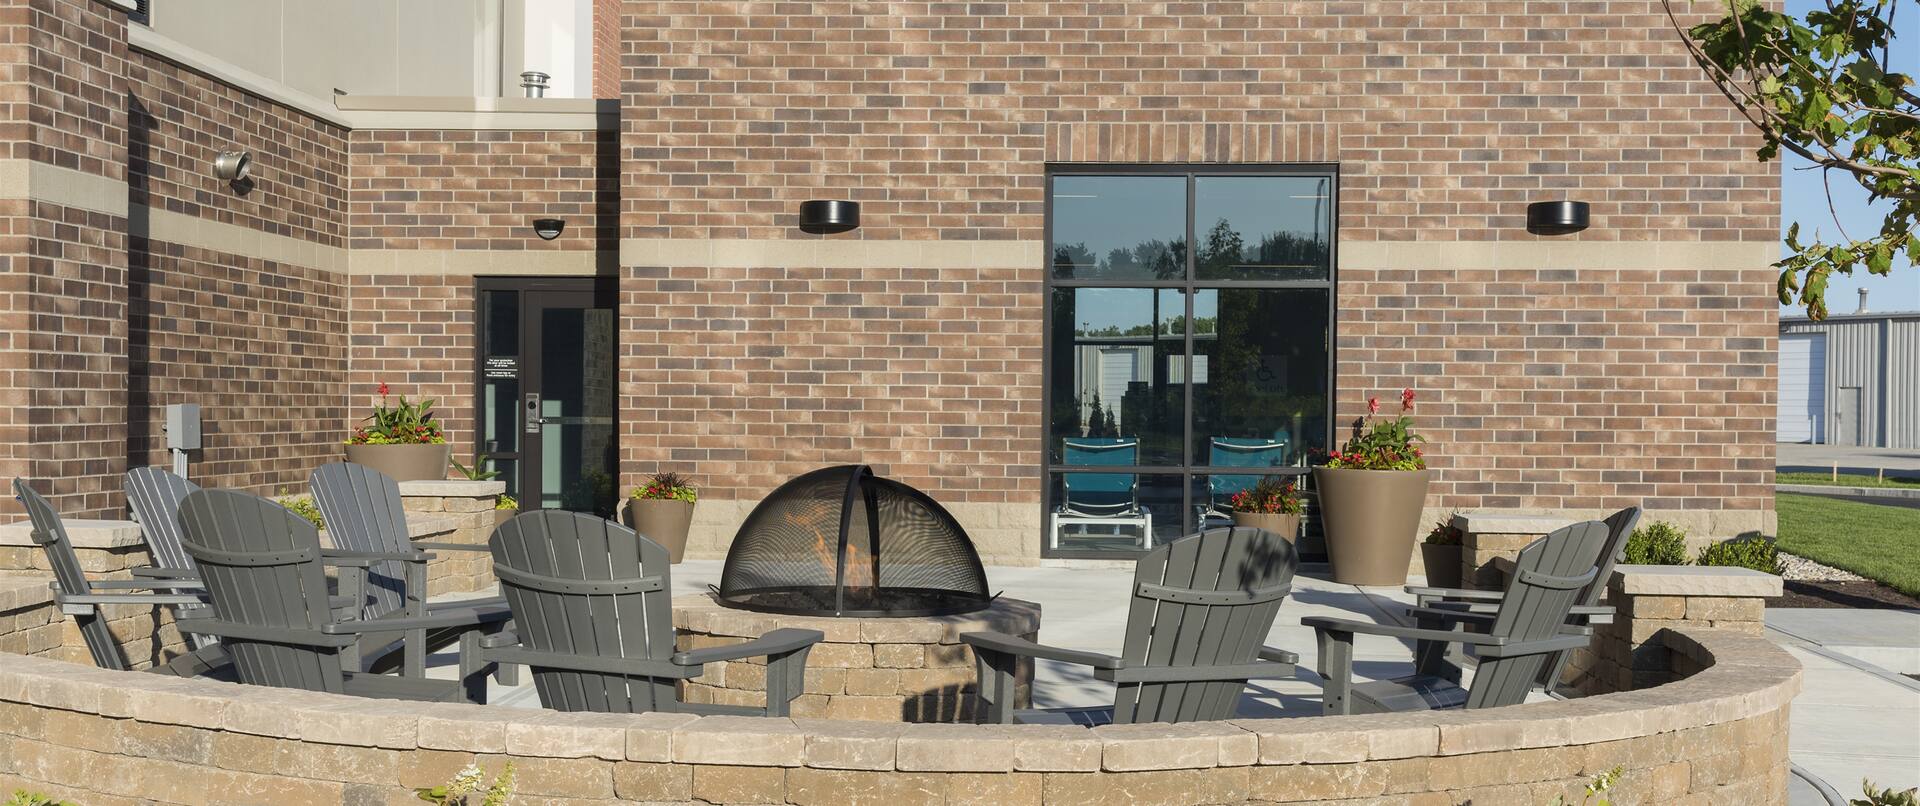 Chairs Around Fire Pit on Outdoor Patio by Hotel Exterior and Landscaping